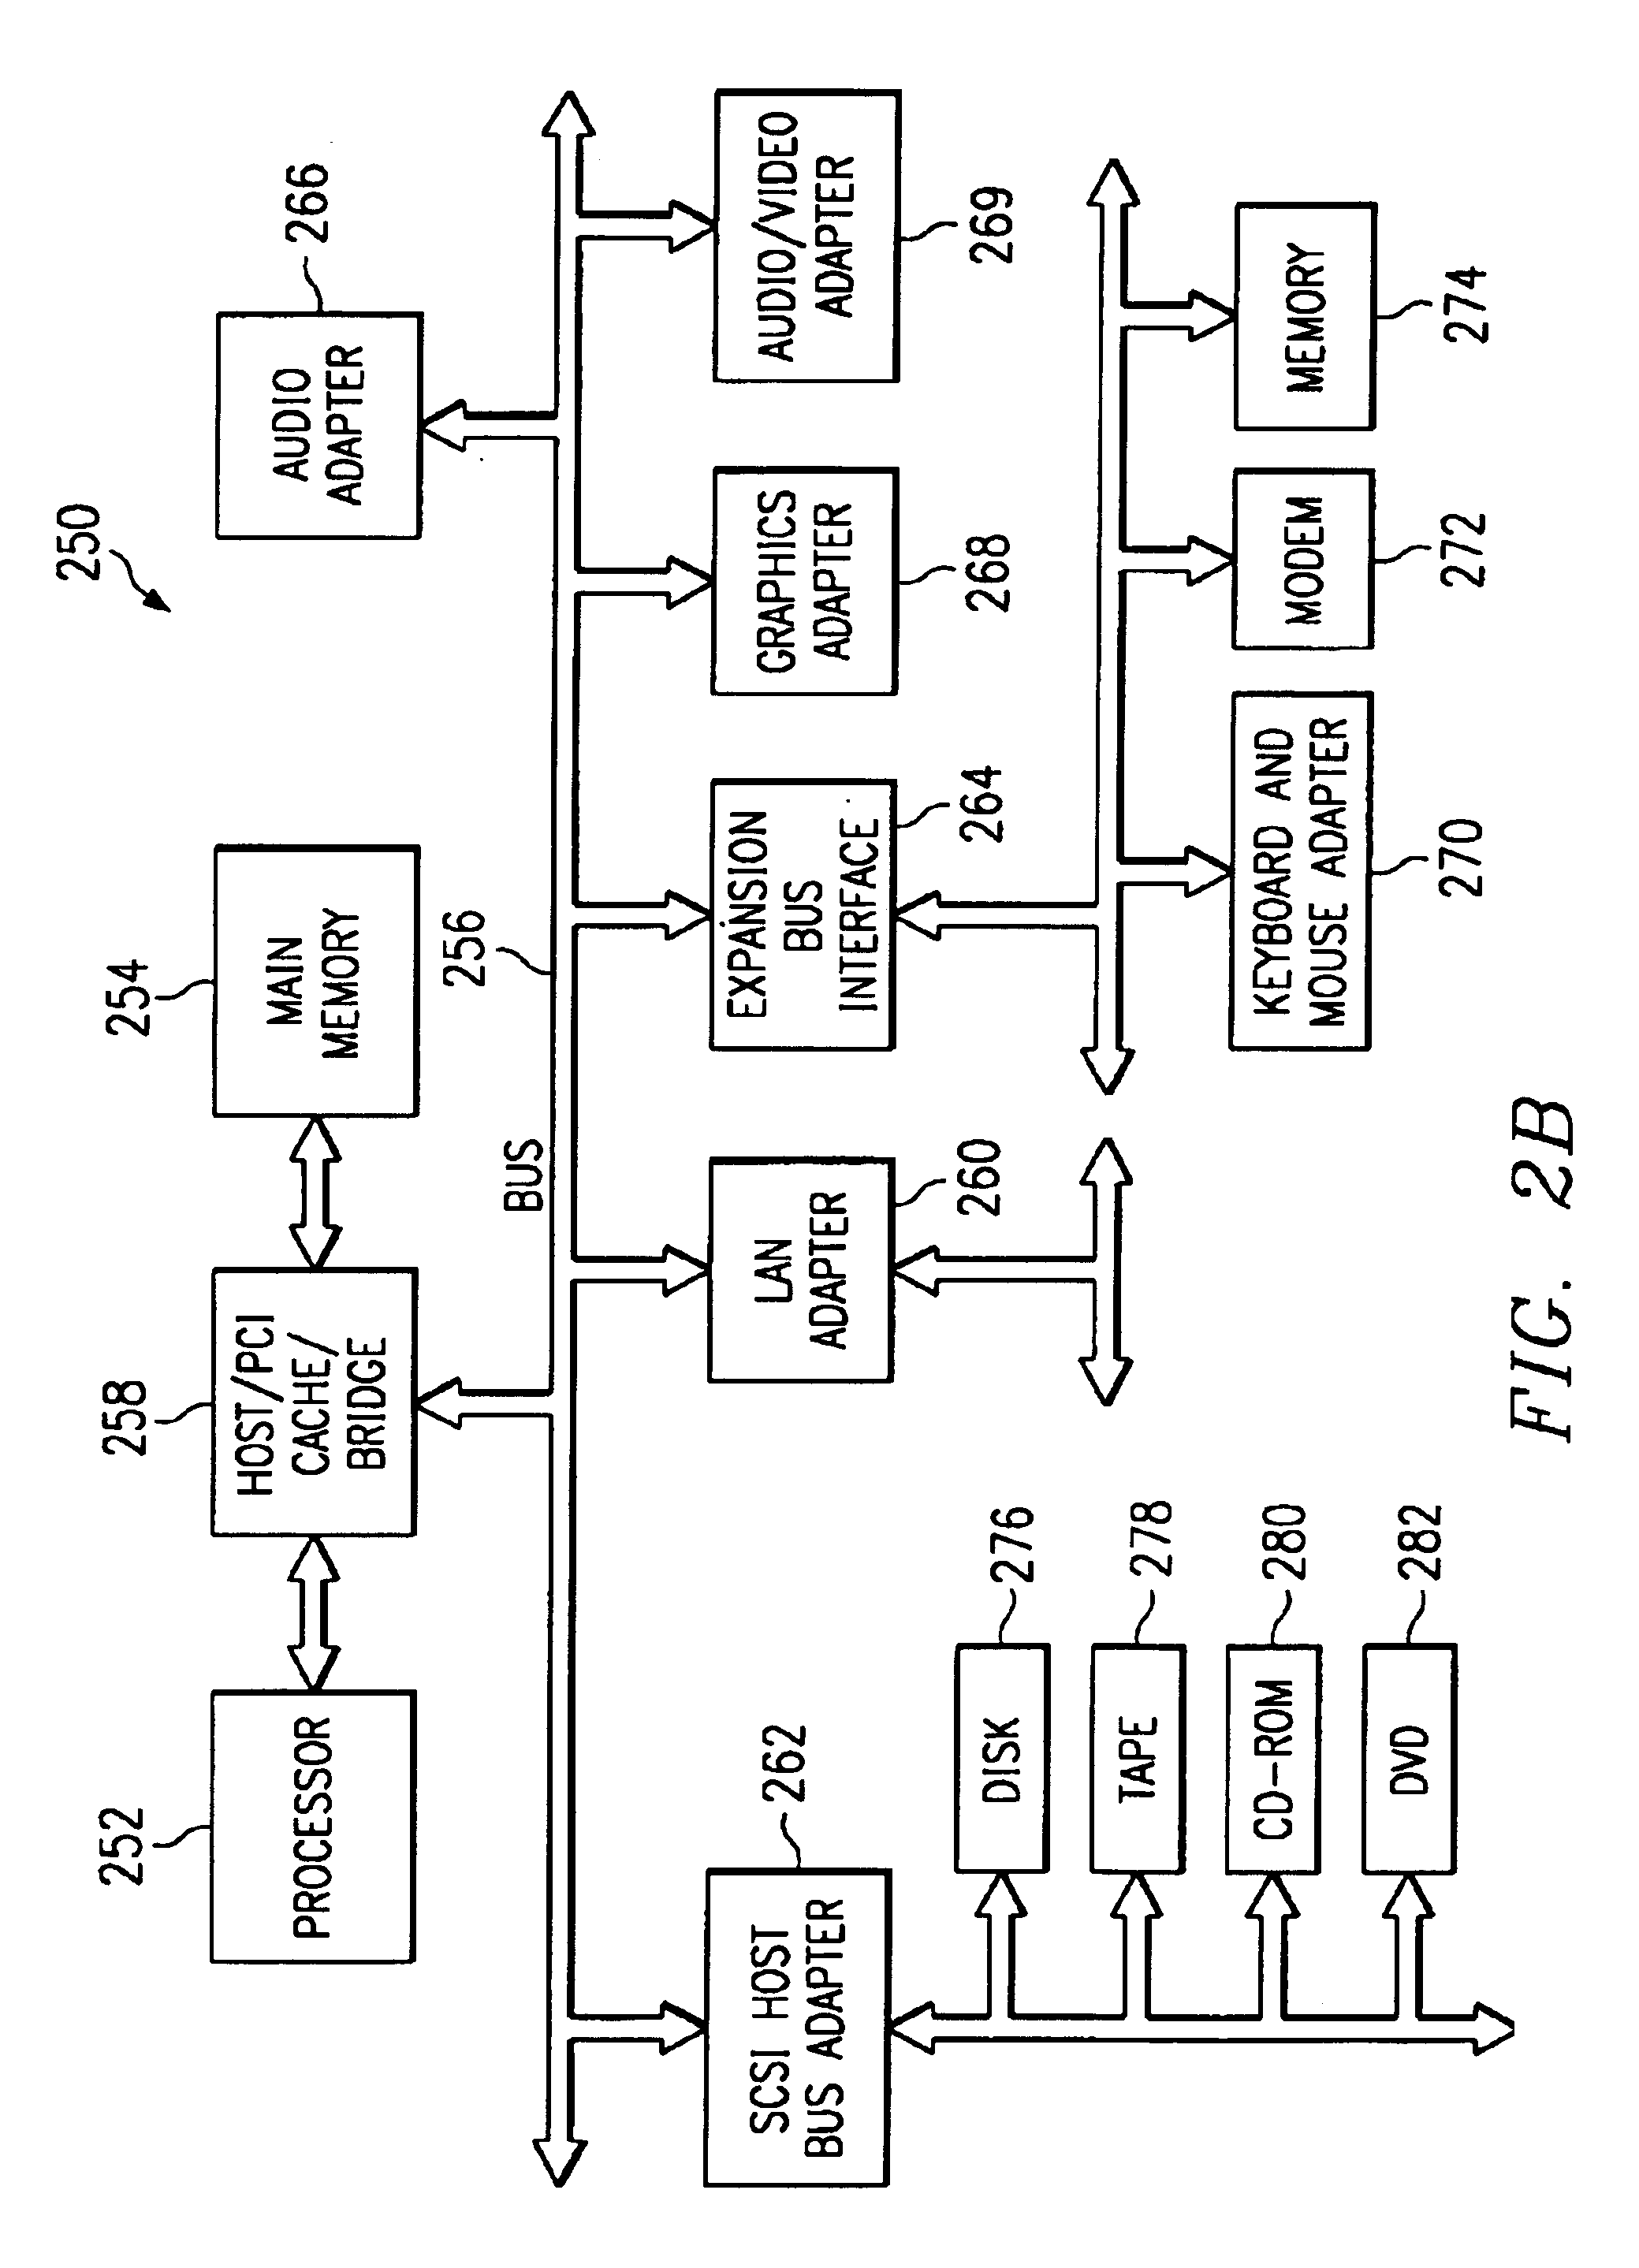 Apparatus and method for maintaining object associations in an object oriented environment